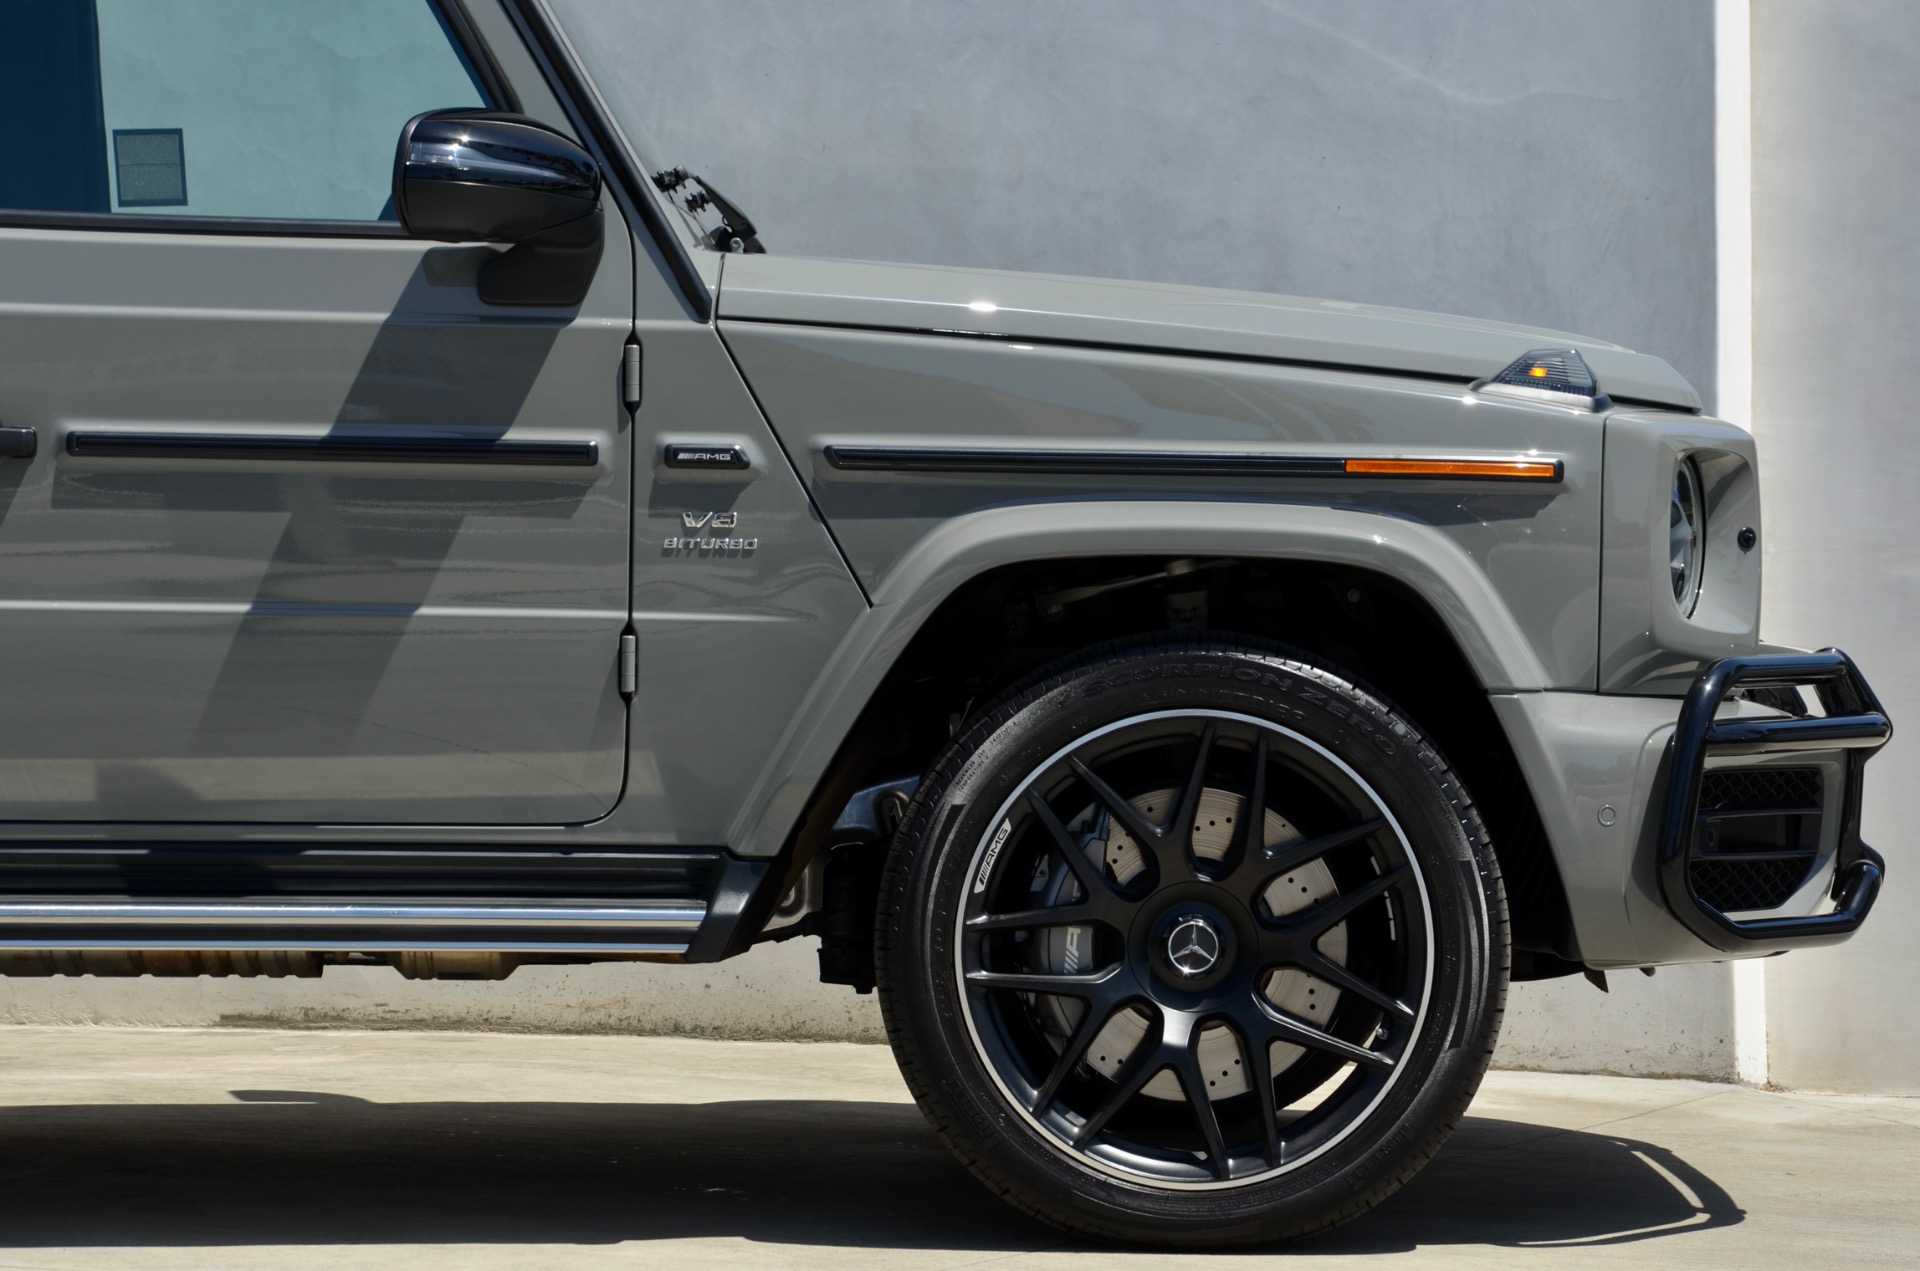 Used-2021-Mercedes-Benz-G-Class-AMG-G-63